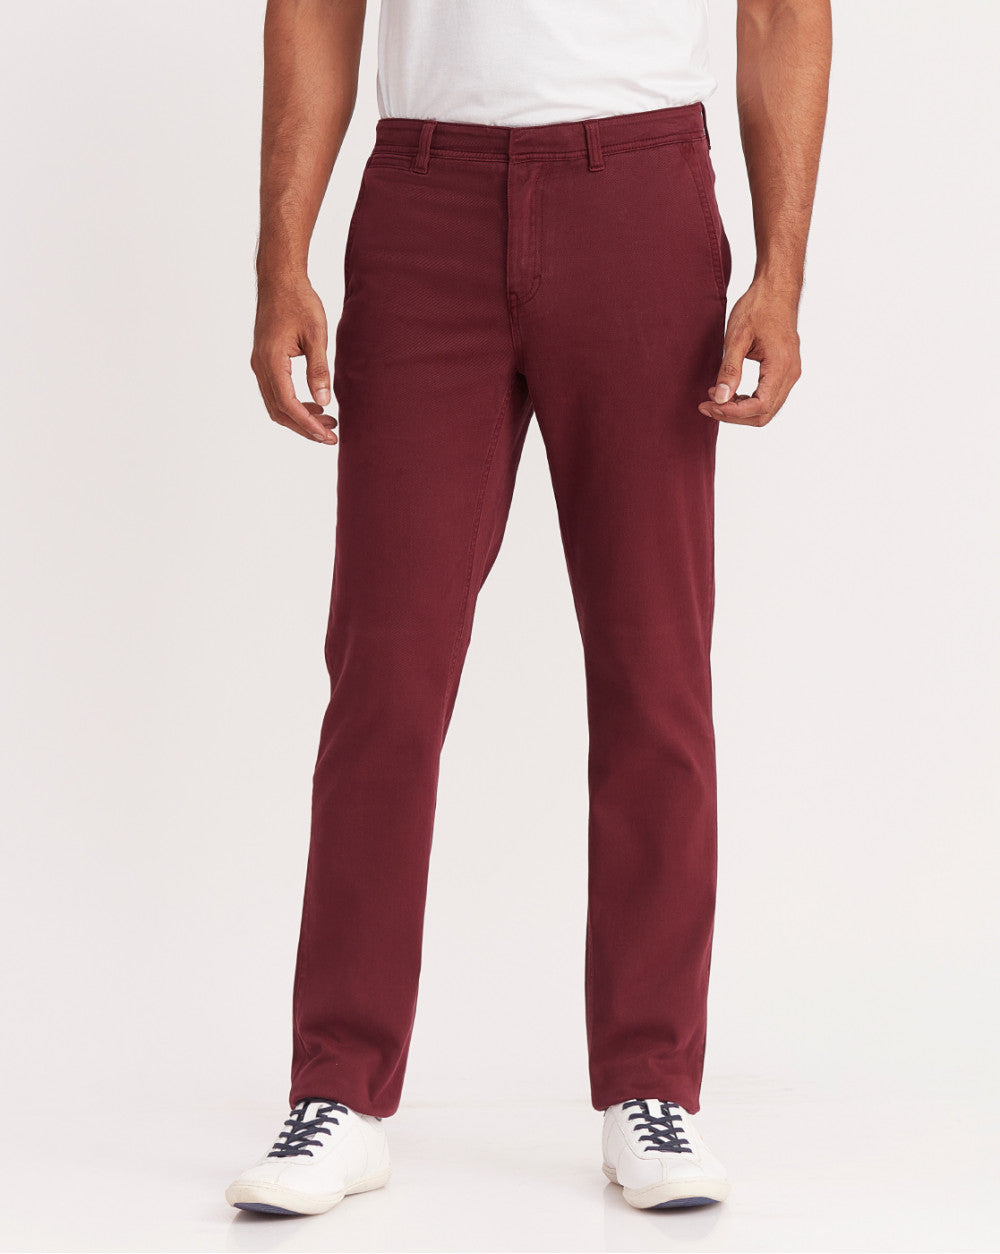 Regular Fit Garment Dyed Chinos - Maroon